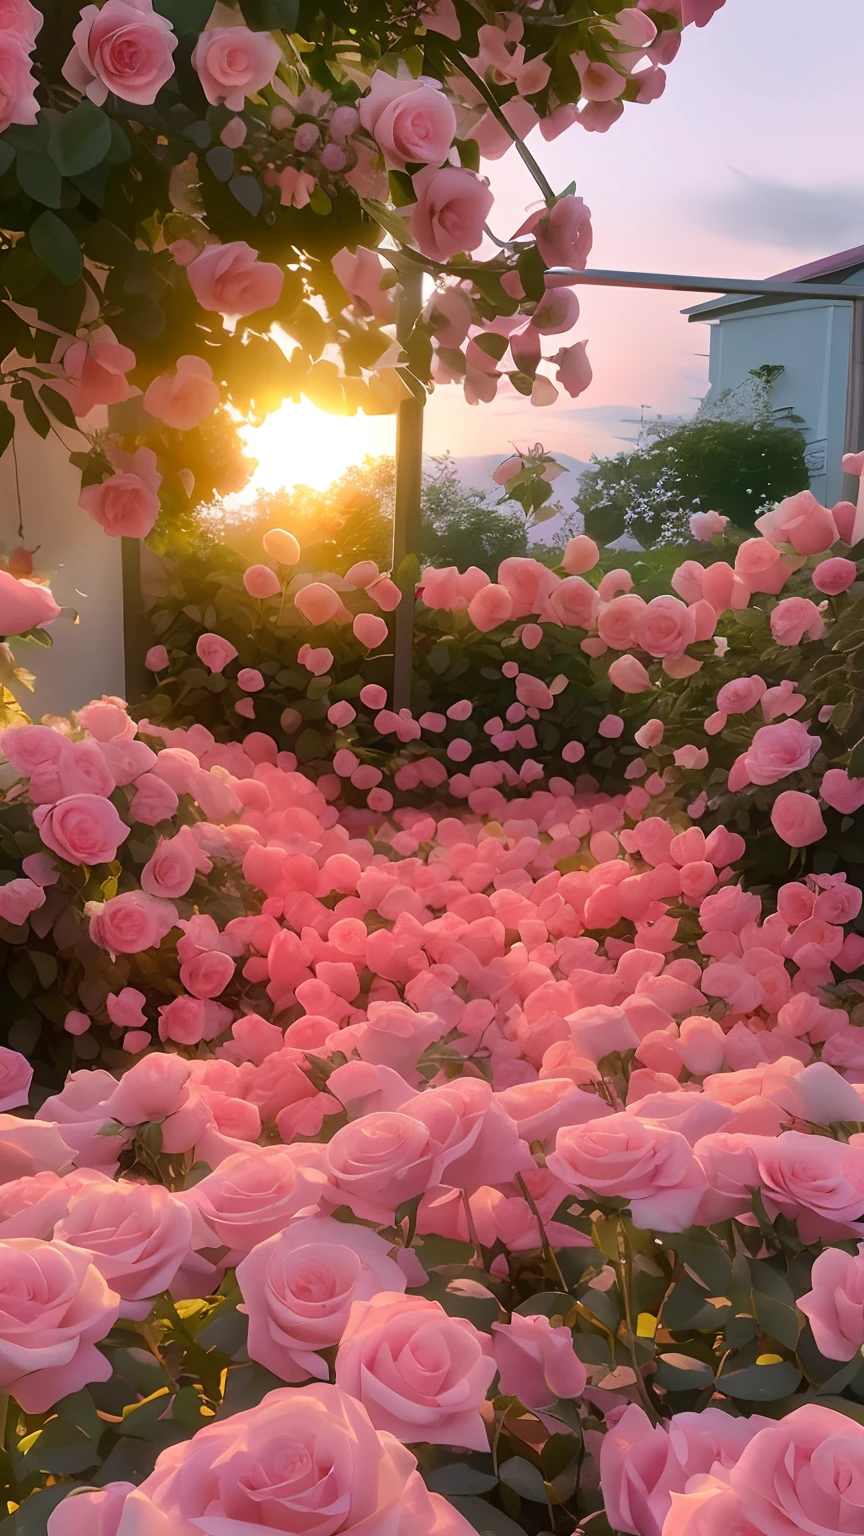 Aesthetic pink roses